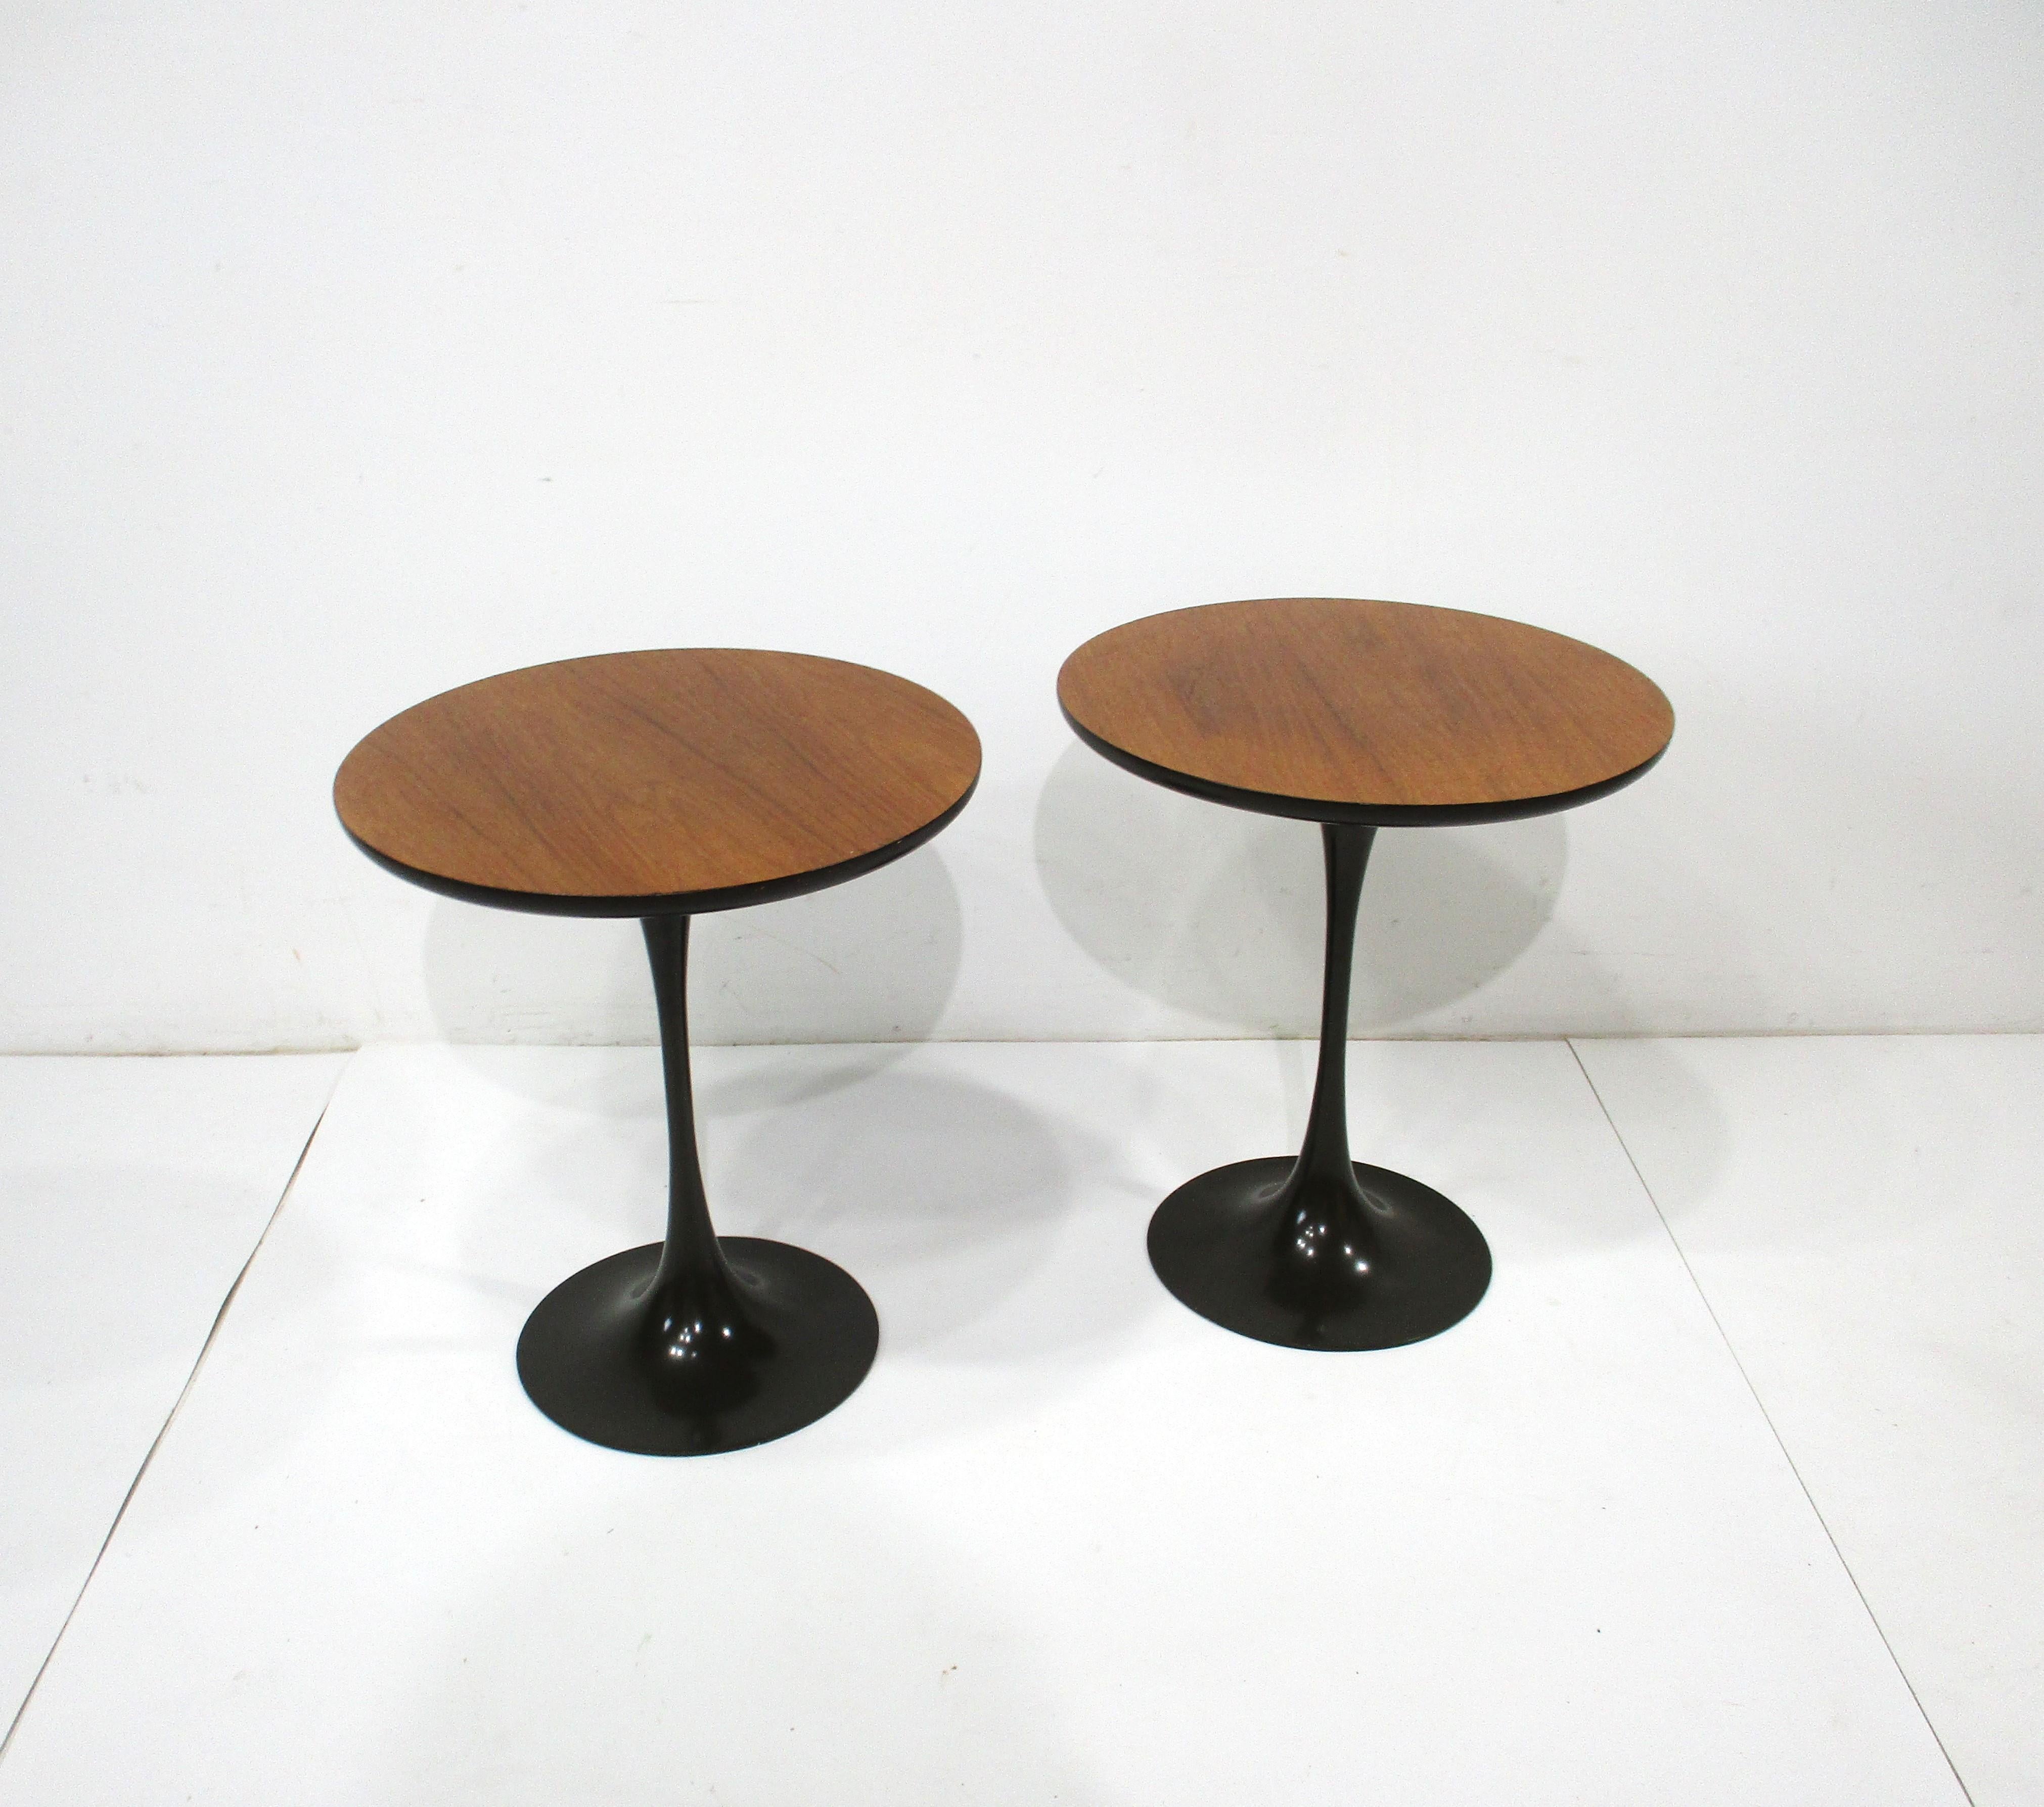 A pair of walnut topped tulip side tables with dark taupe colored steel bases designed by Maurice Burke . Rich well grained walnut and the dark bases give the pieces a sophisticated Mid Century look perfect to finish off that room . Manufactured by